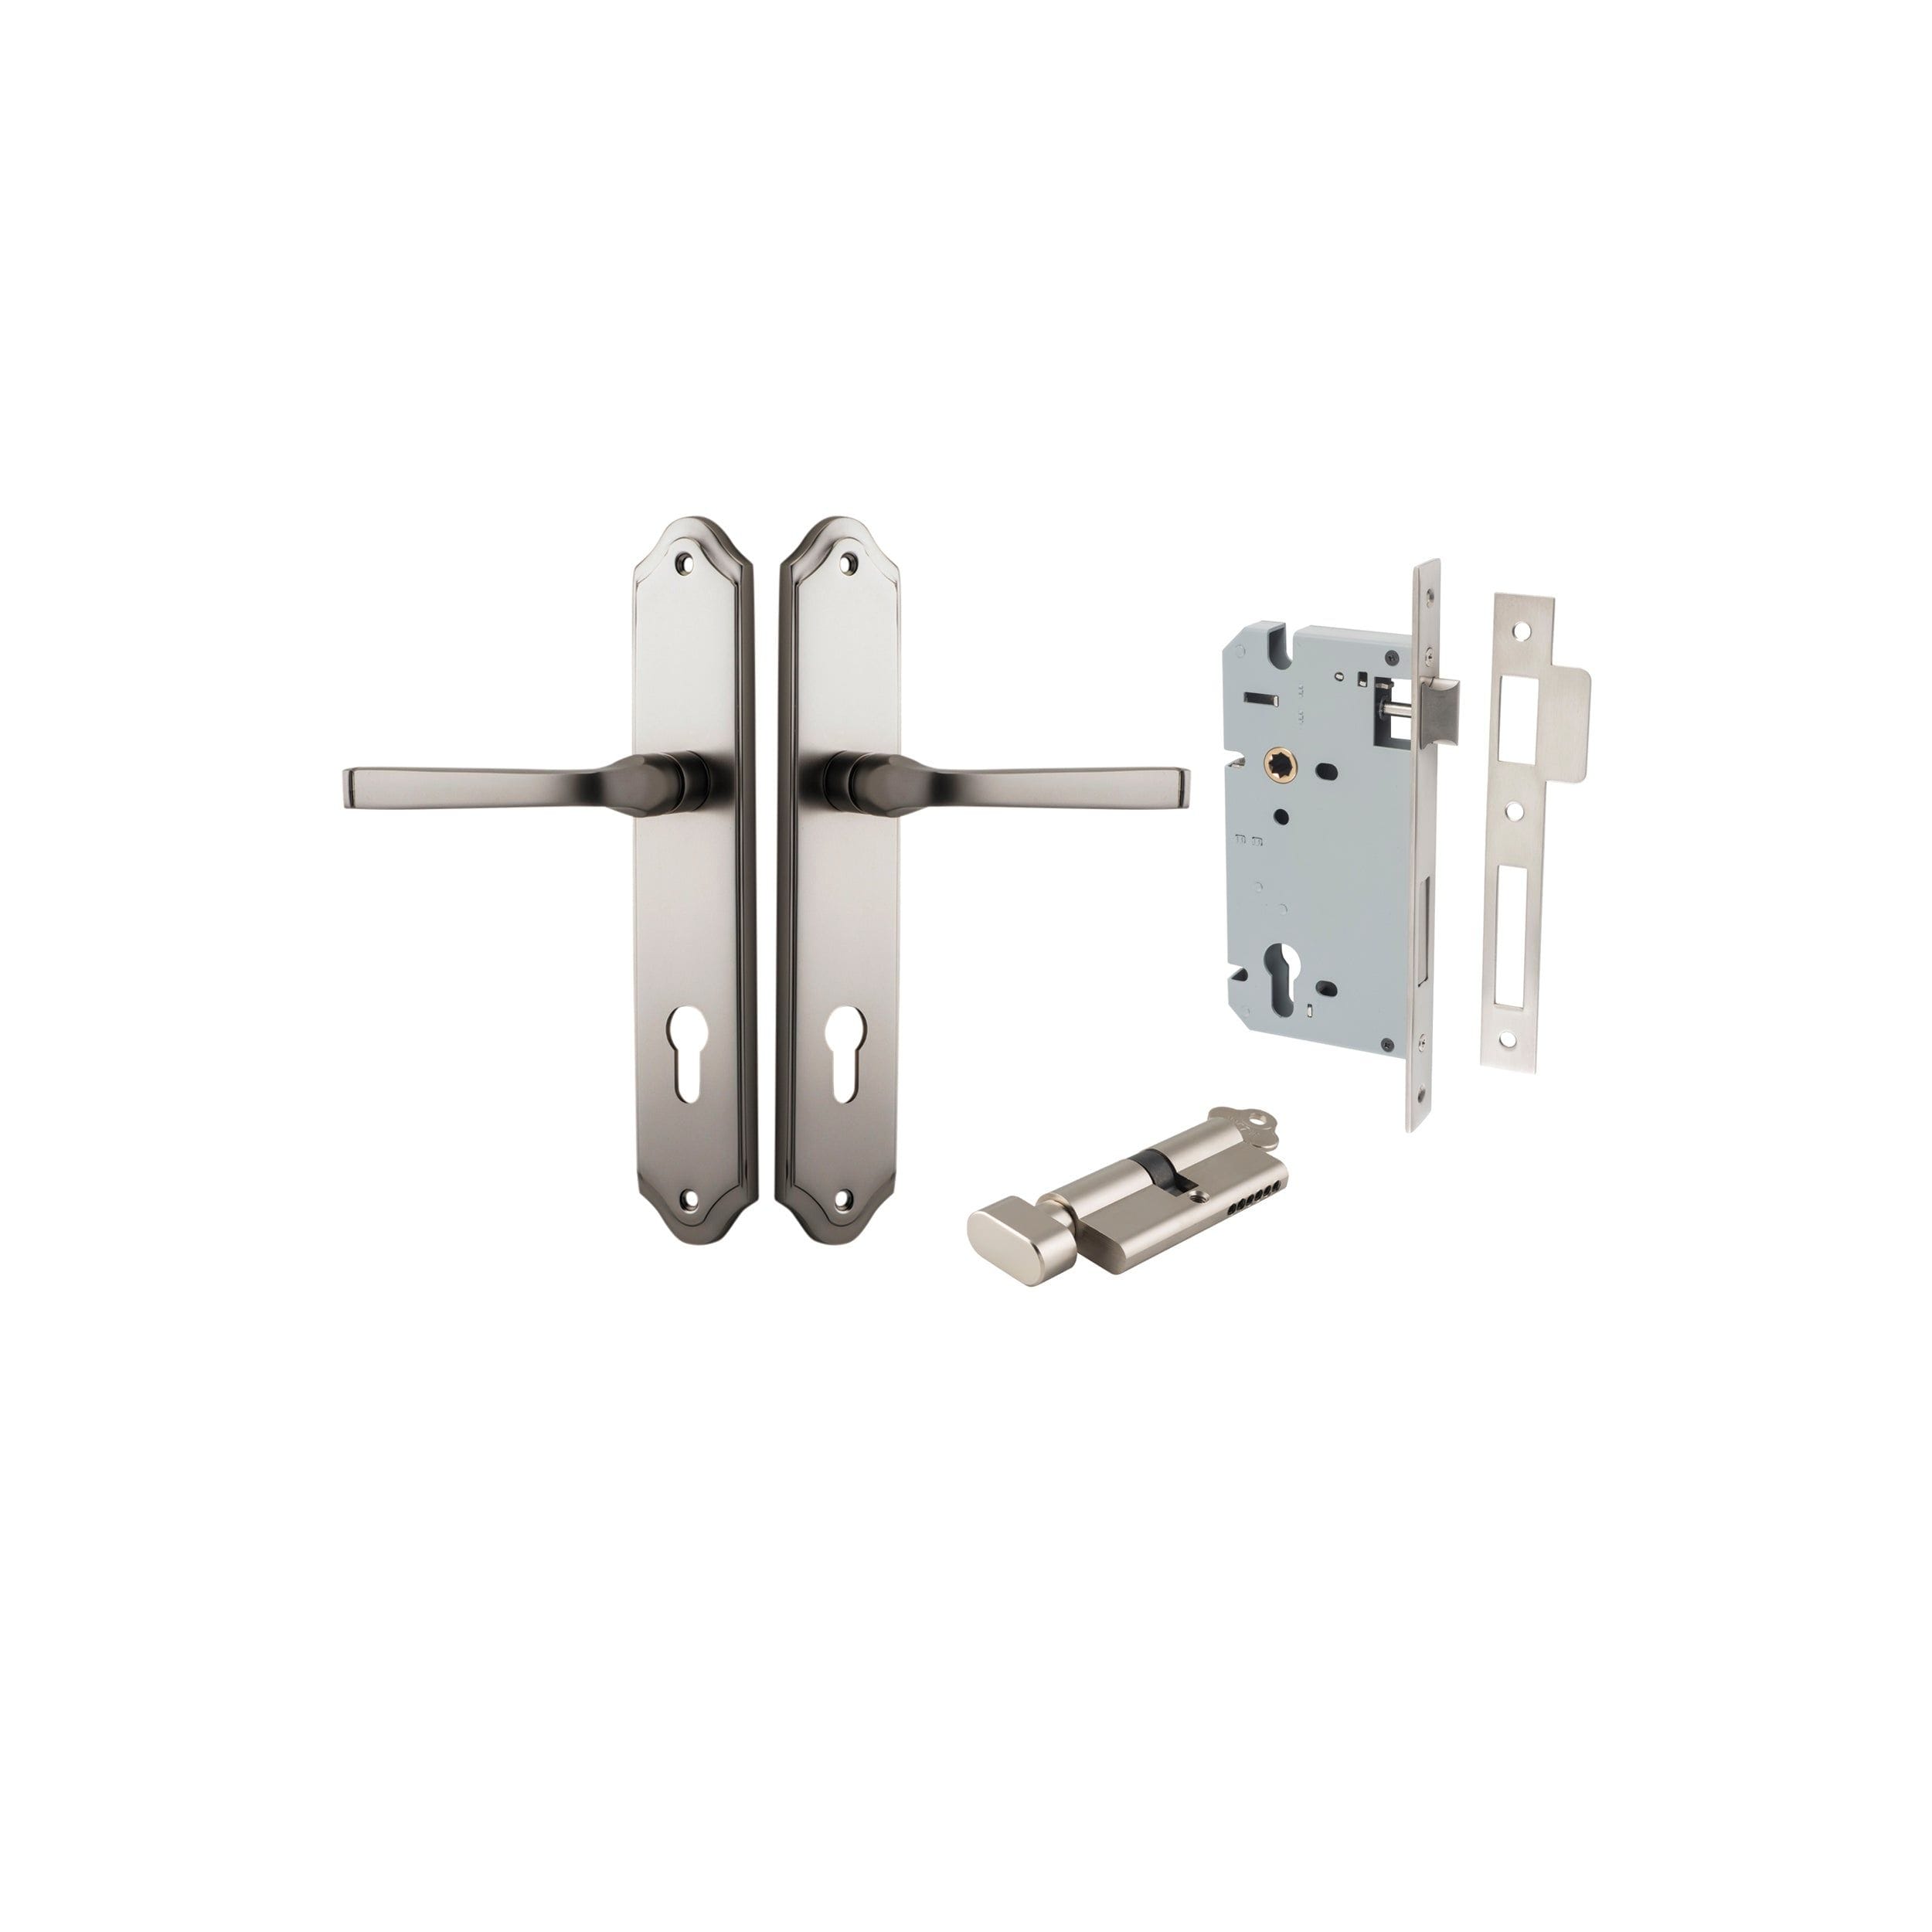 Annecy Lever Shouldered Satin Nickel Entrance Kit - Key/Thumb Turn